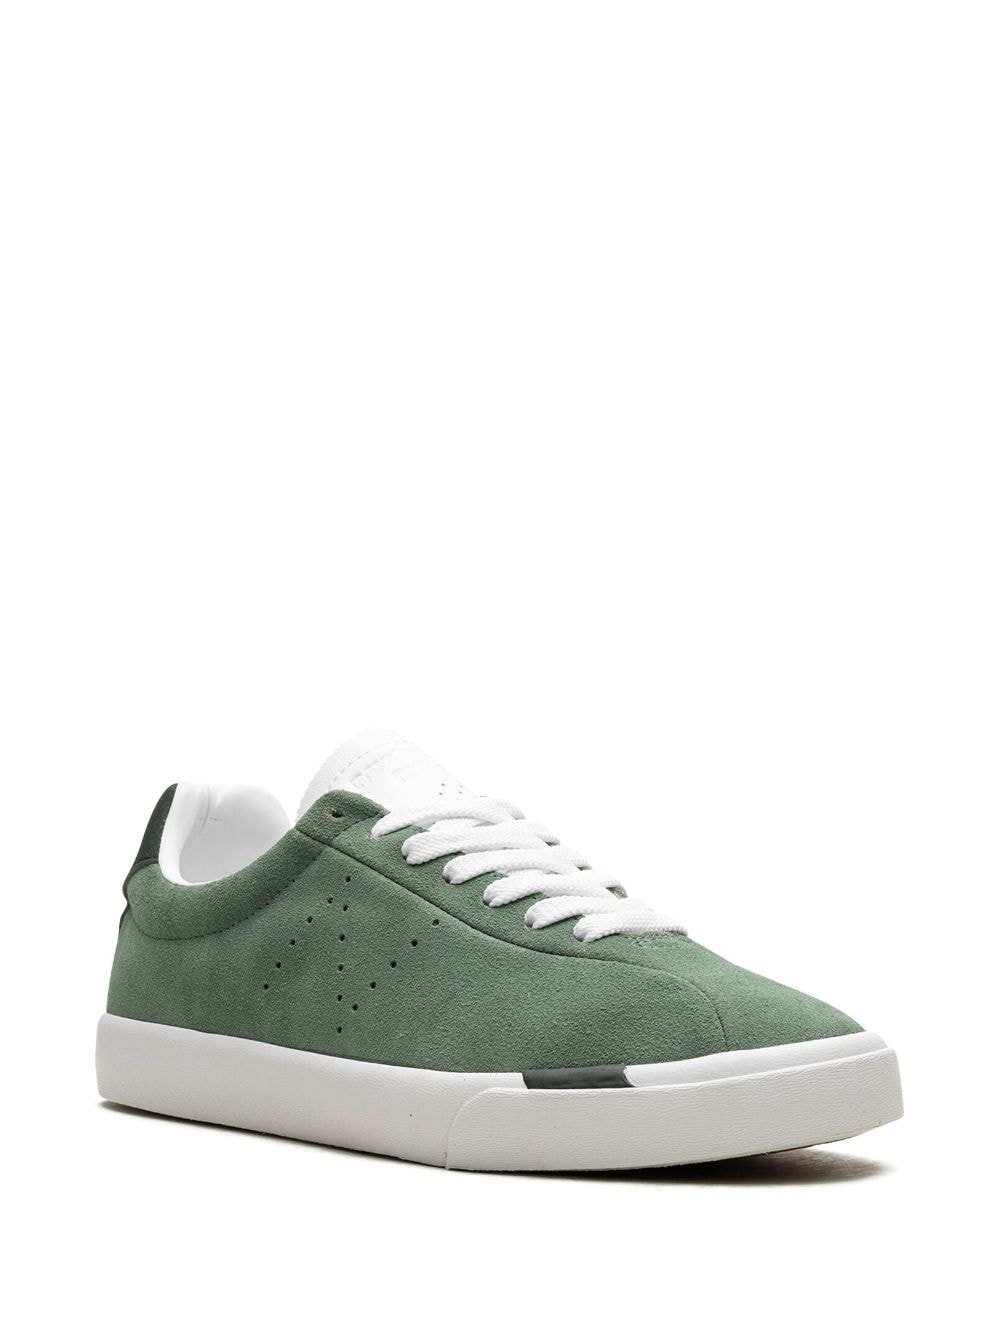 Image 2 of New Balance Numeric 22 "Green Suede" sneakers